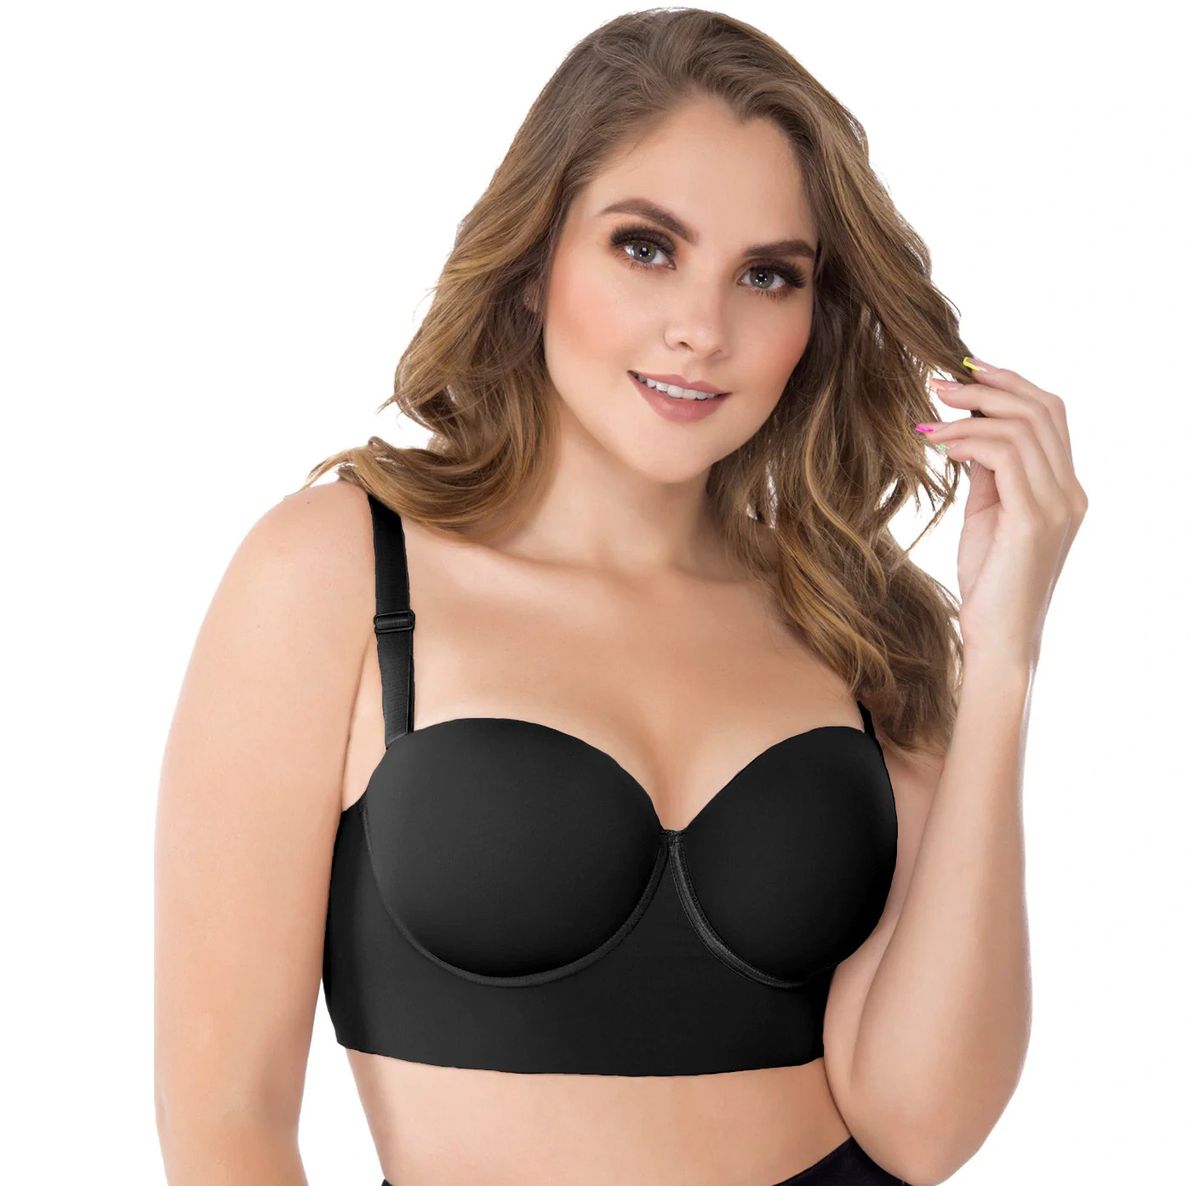 UPLADY 8034 FIRM CONTROL STRAPLESS BRA FOR WOMEN (Size: 32B/S, Color: Black)